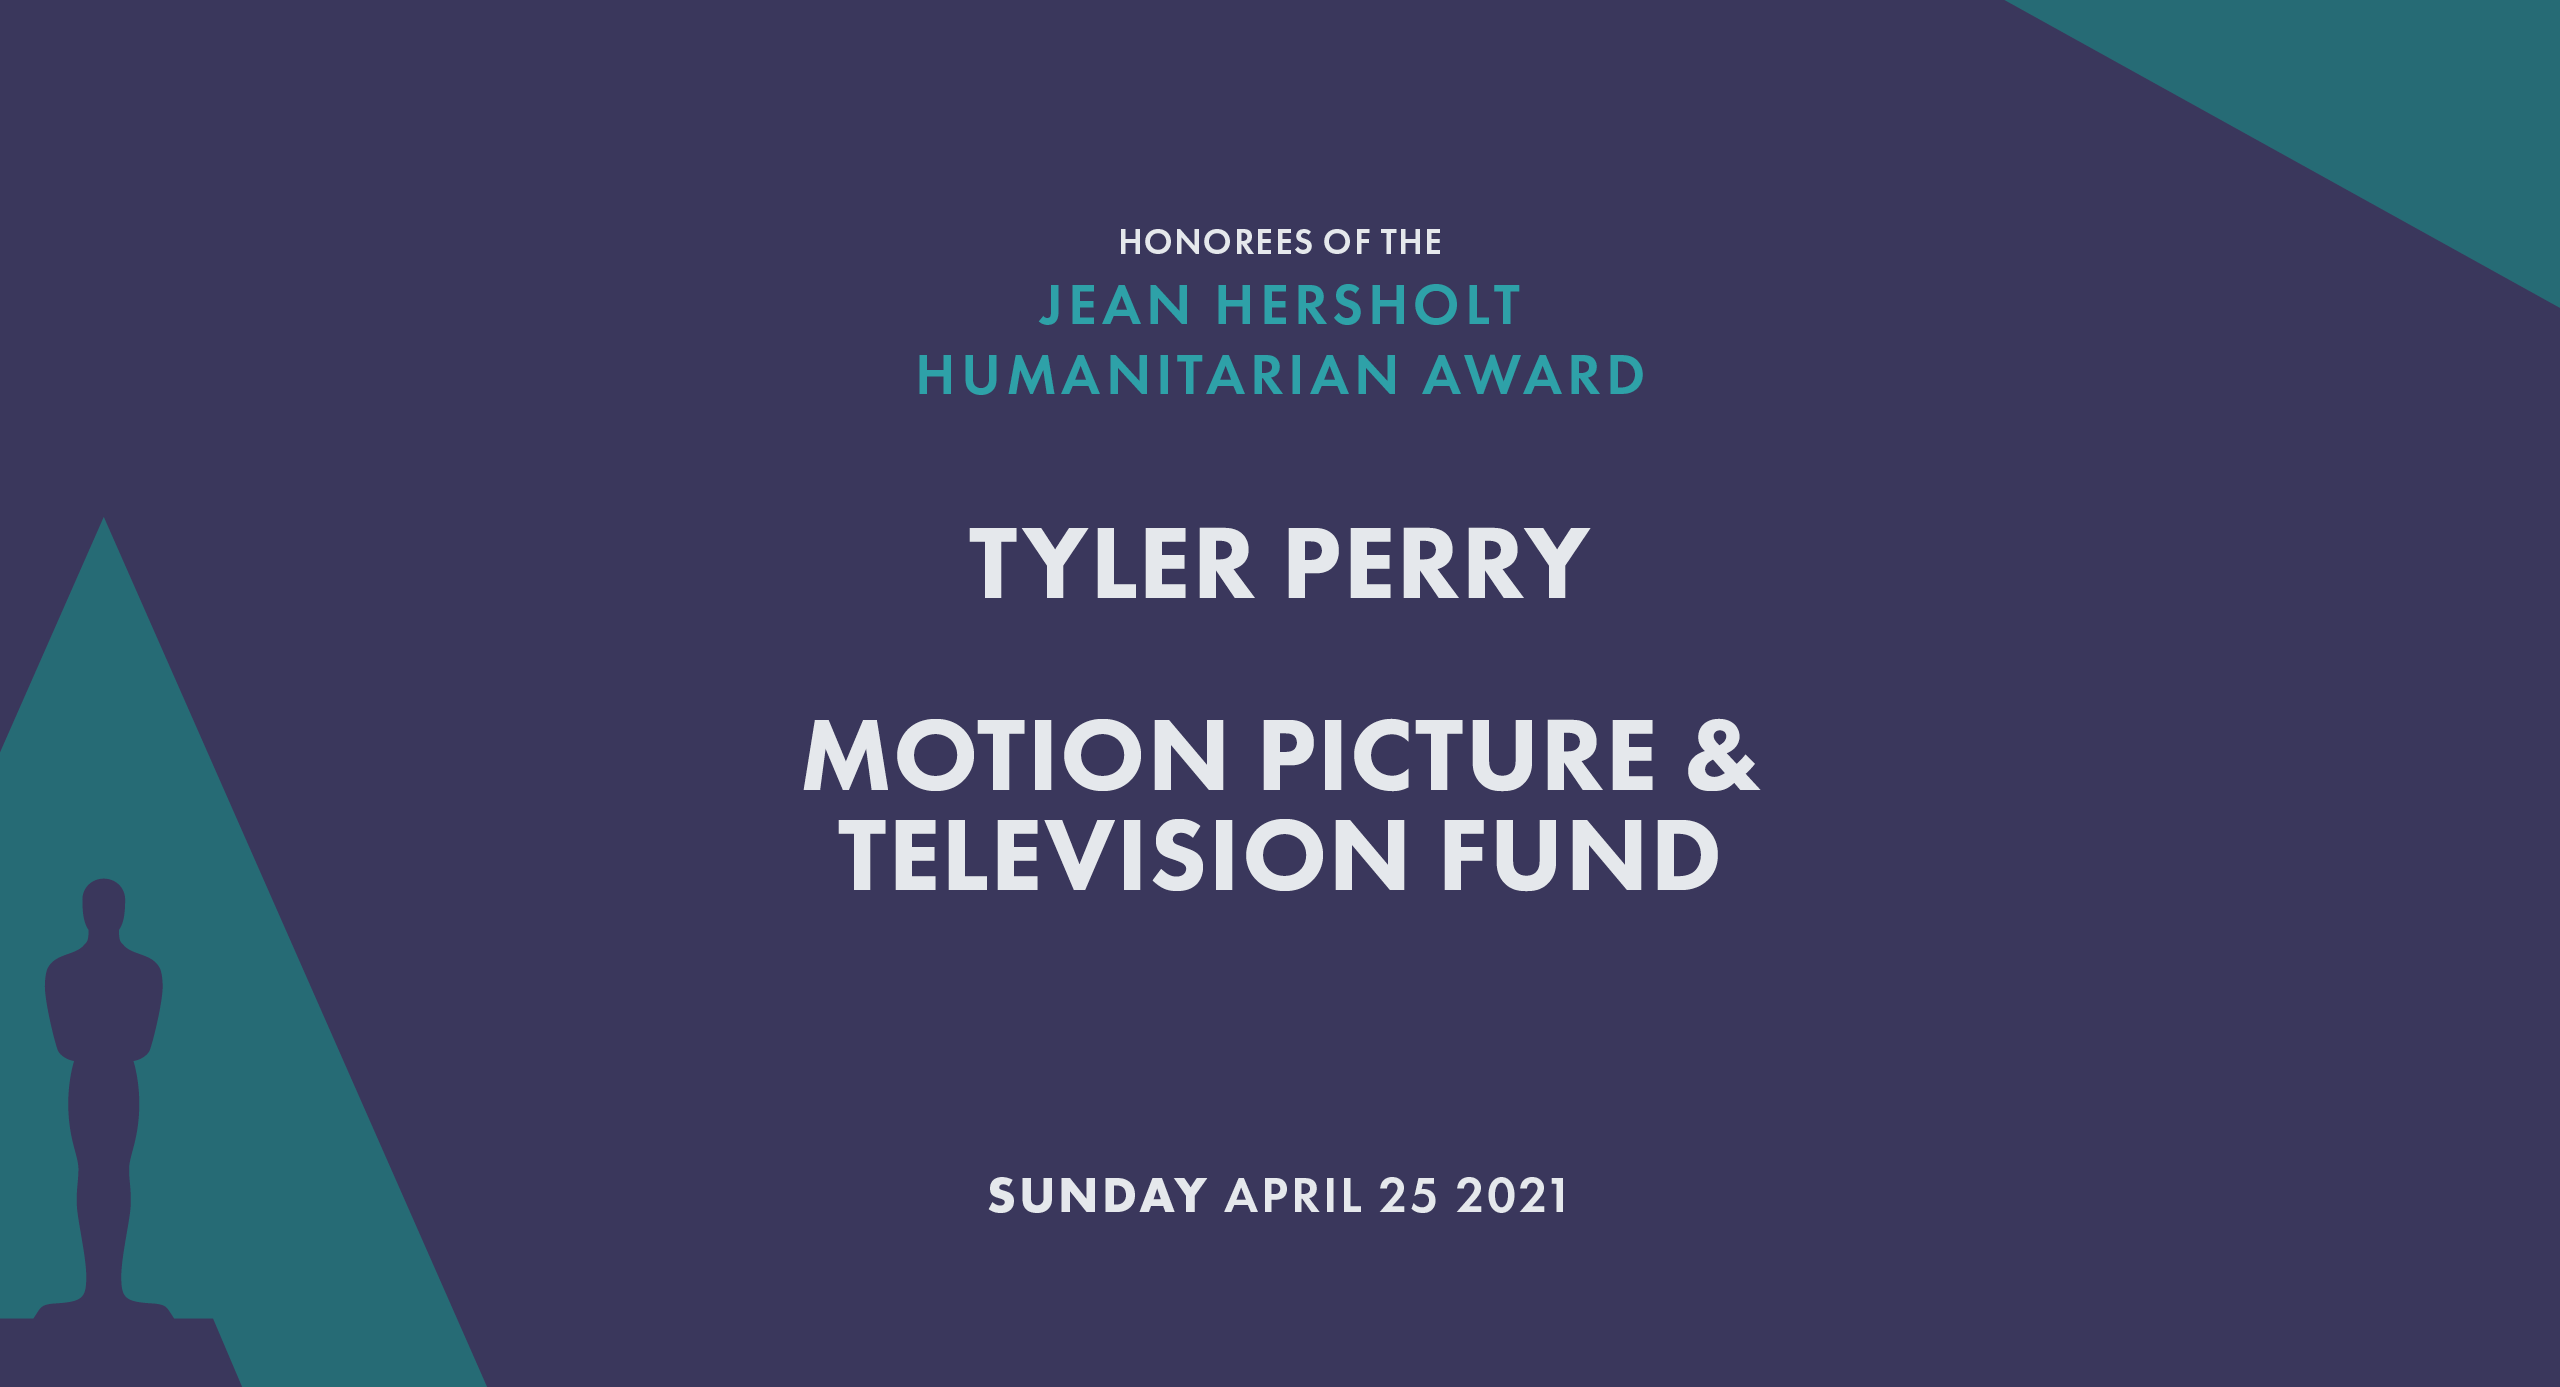 THE ACADEMY TO HONOR TYLER PERRY AND THE MOTION PICTURE & TELEVISION FUND WITH JEAN HERSHOLT HUMANITARIAN AWARDS